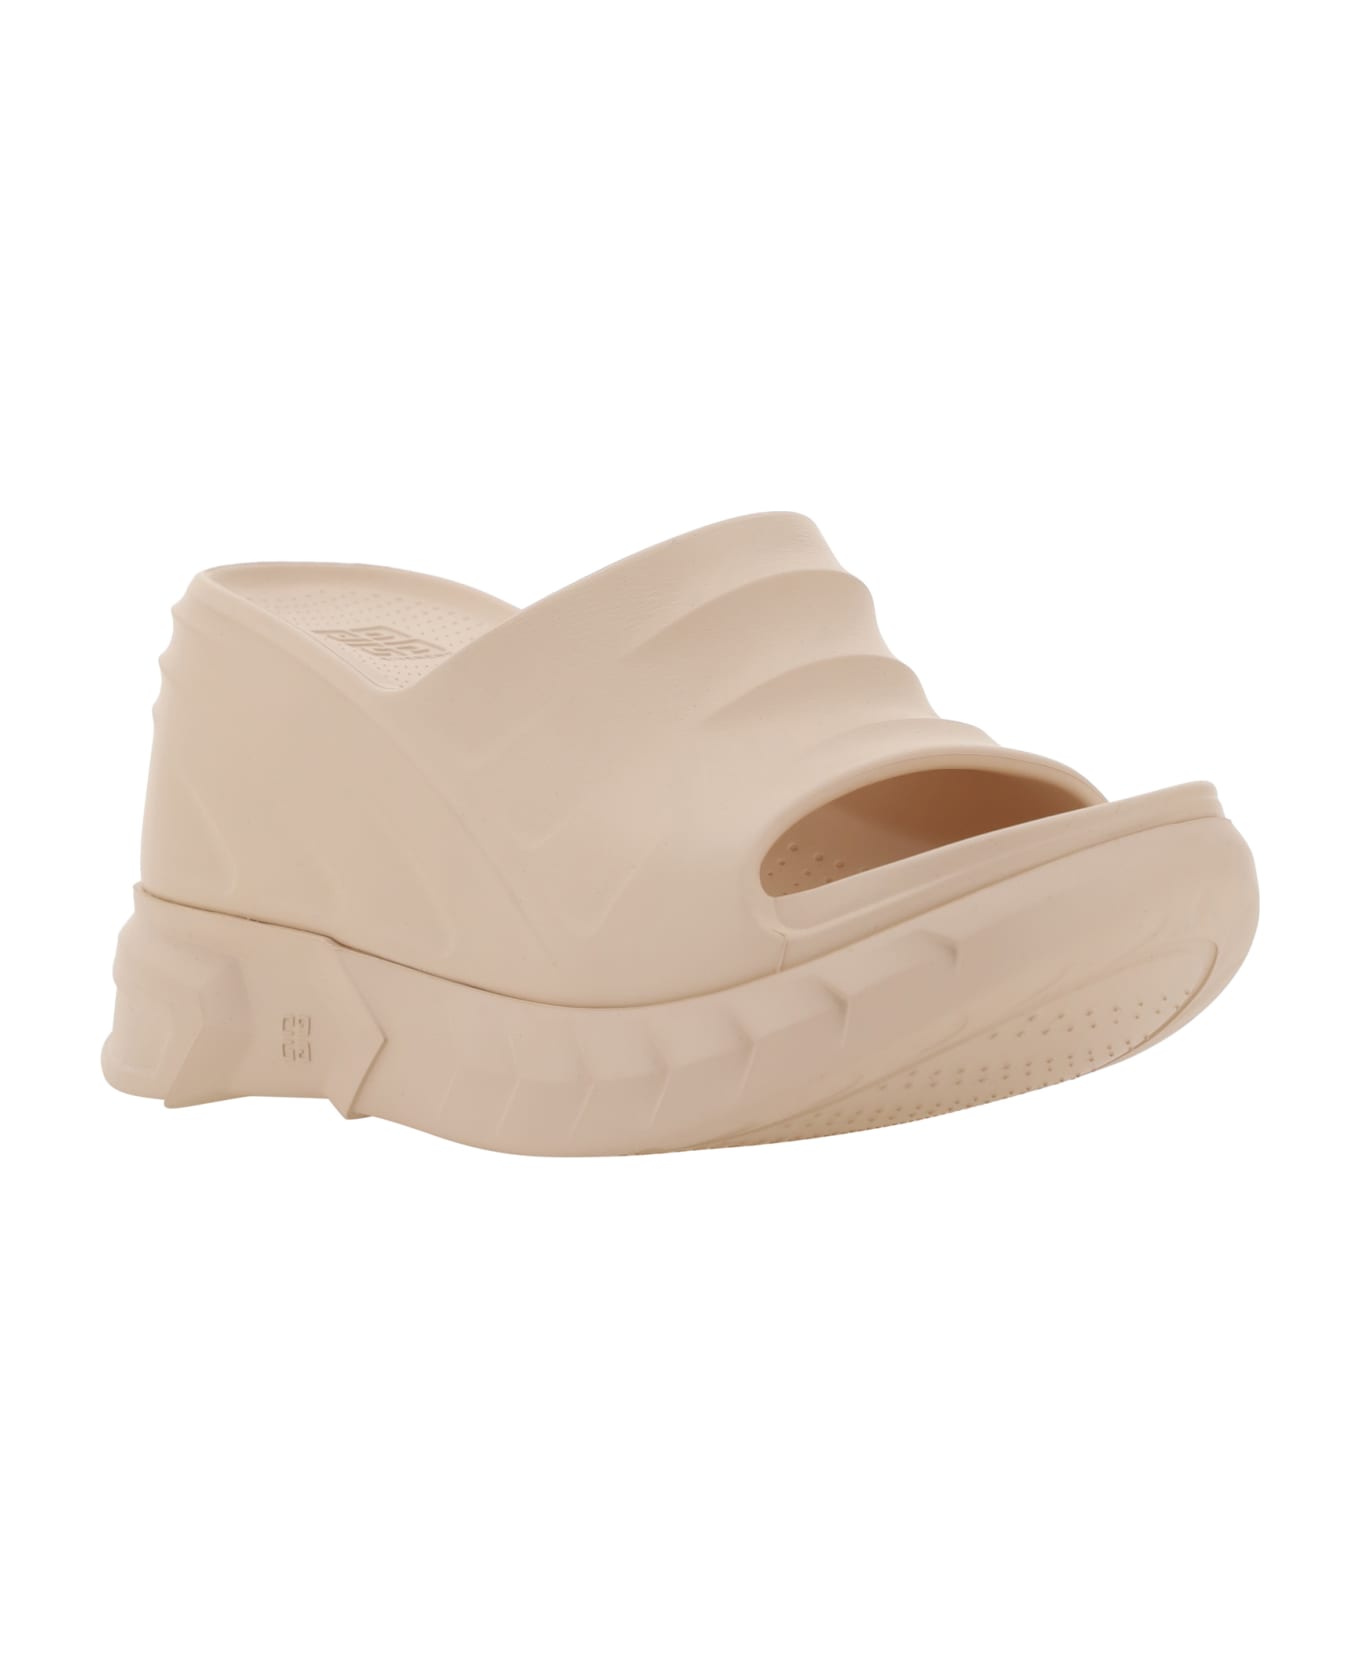 Givenchy Marshmallow Sandals - Skin Rose